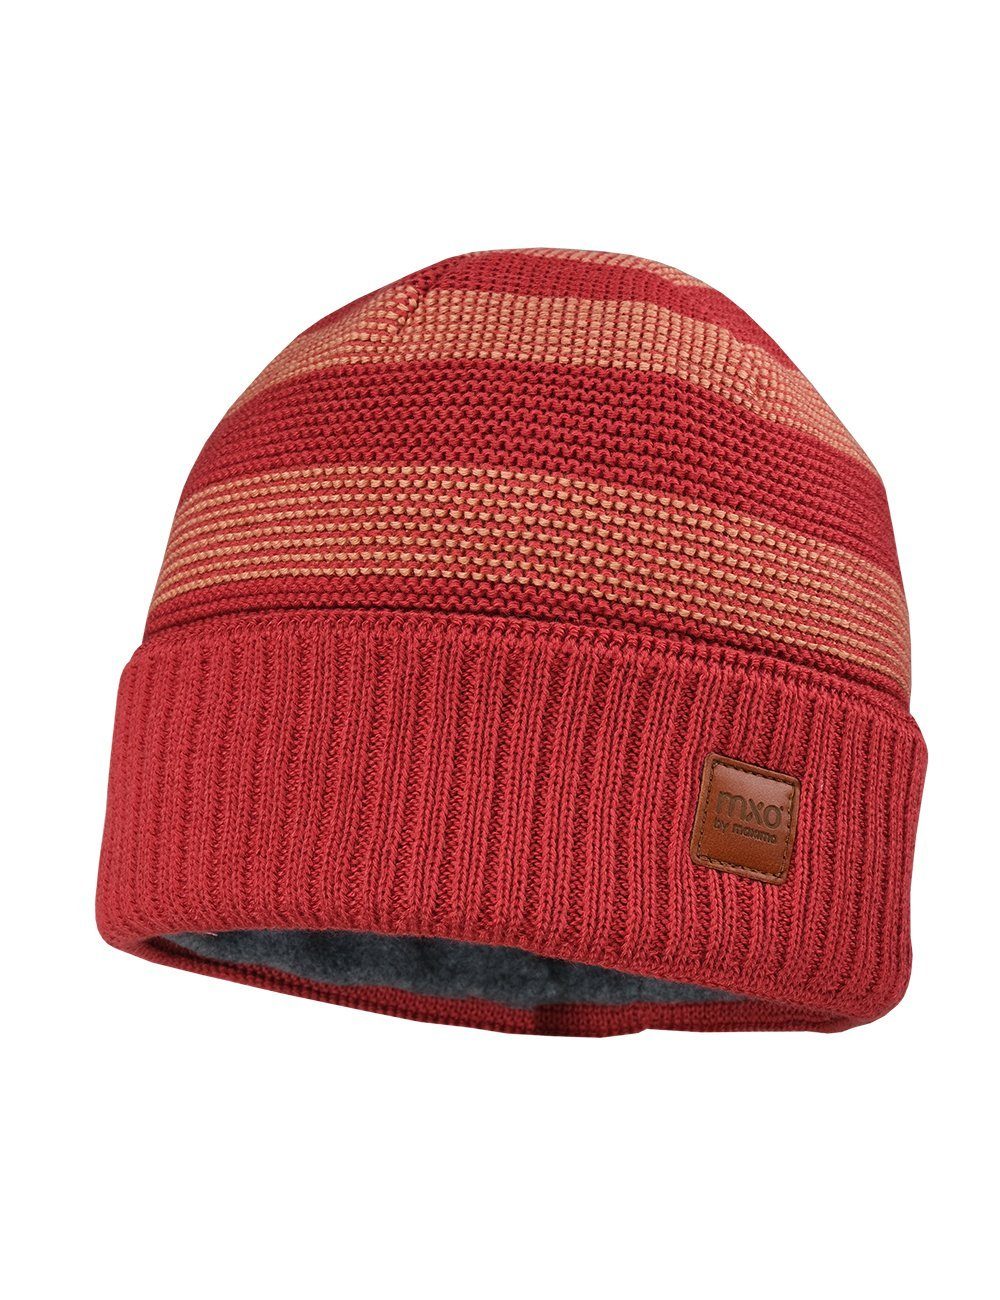 MAXIMO GOTS rosewood GOTS Organi Futter LL, Strickmütze MINI-Beanie, Umschlag in Germany Made